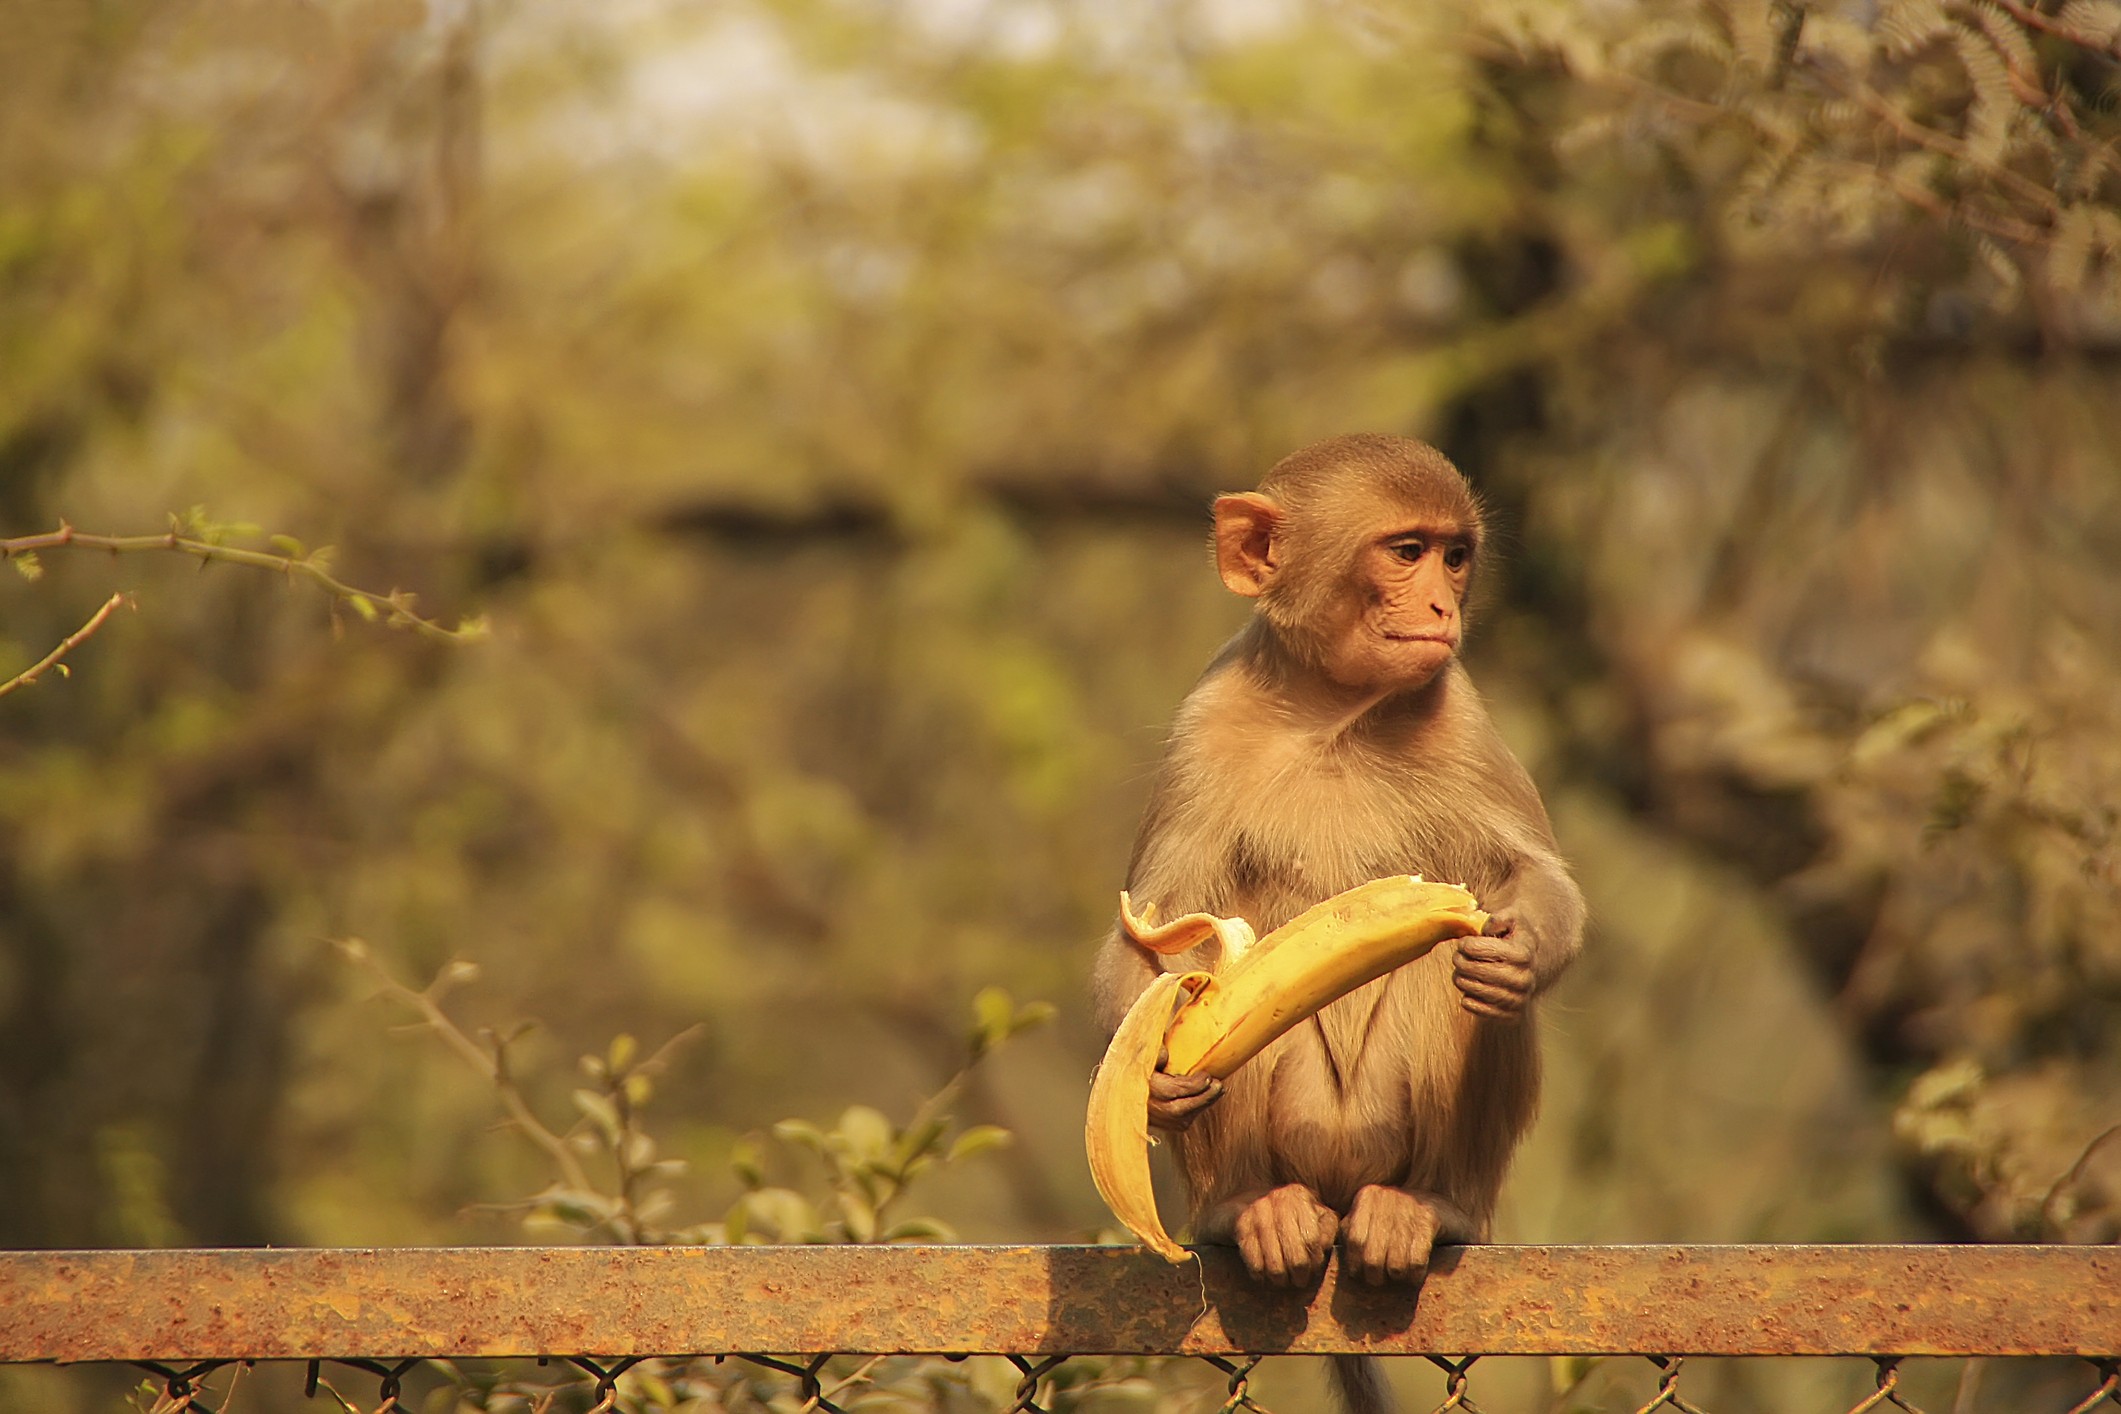 Gang arrested for stealing monkeys in India (Photo: Getty)